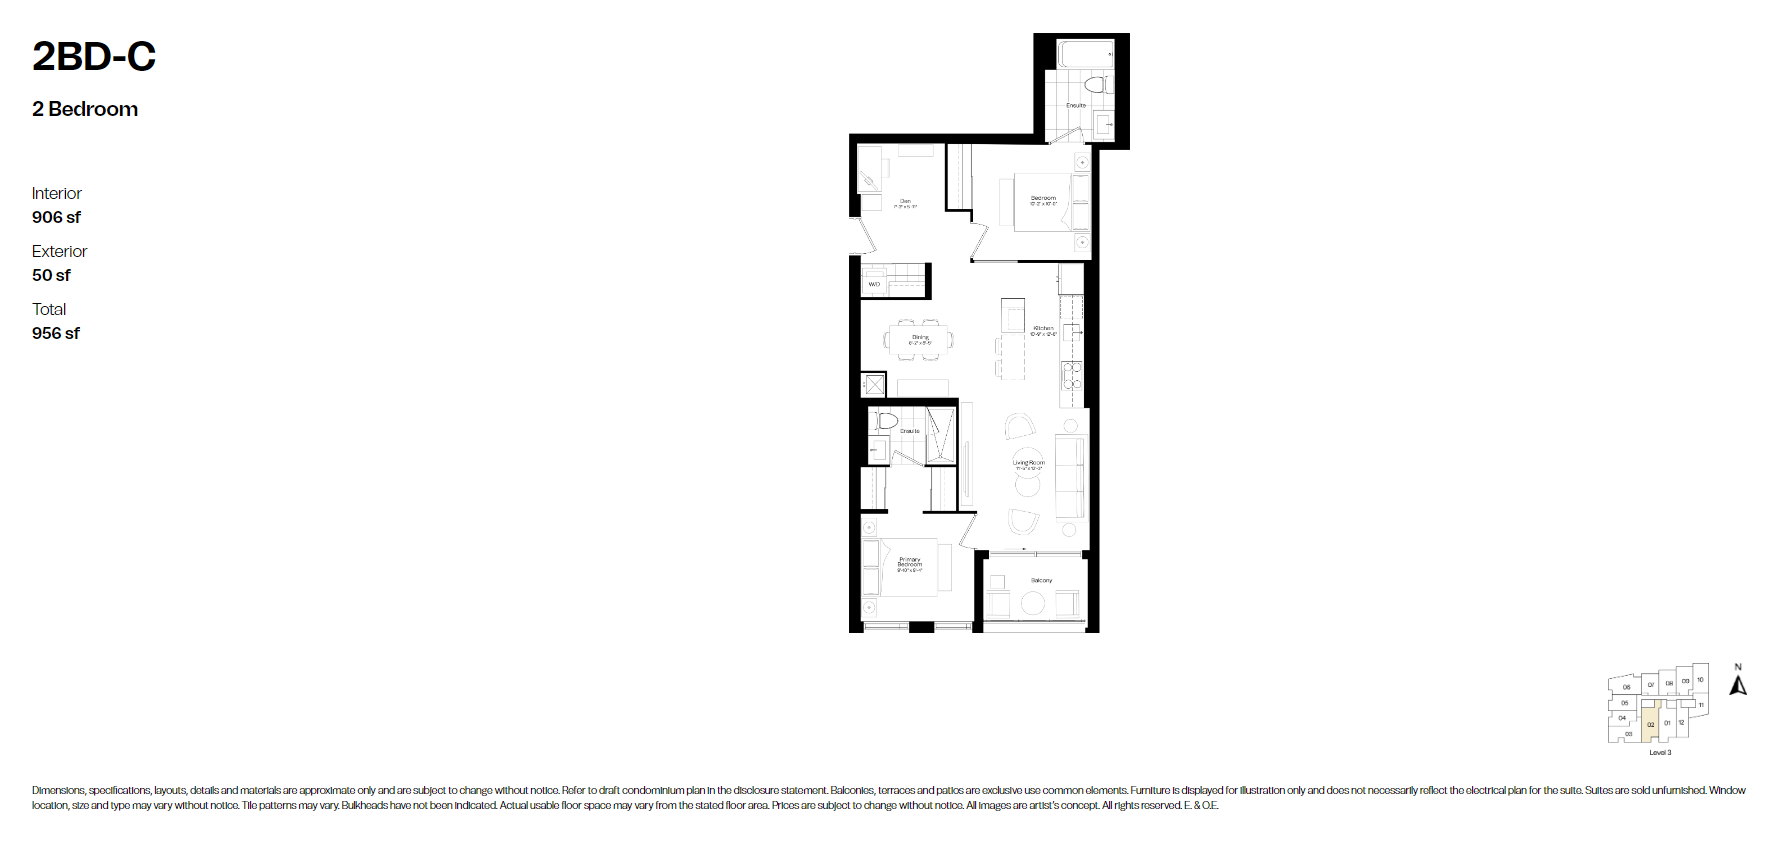  2BD-C  Floor Plan of Courcelette Condos with undefined beds